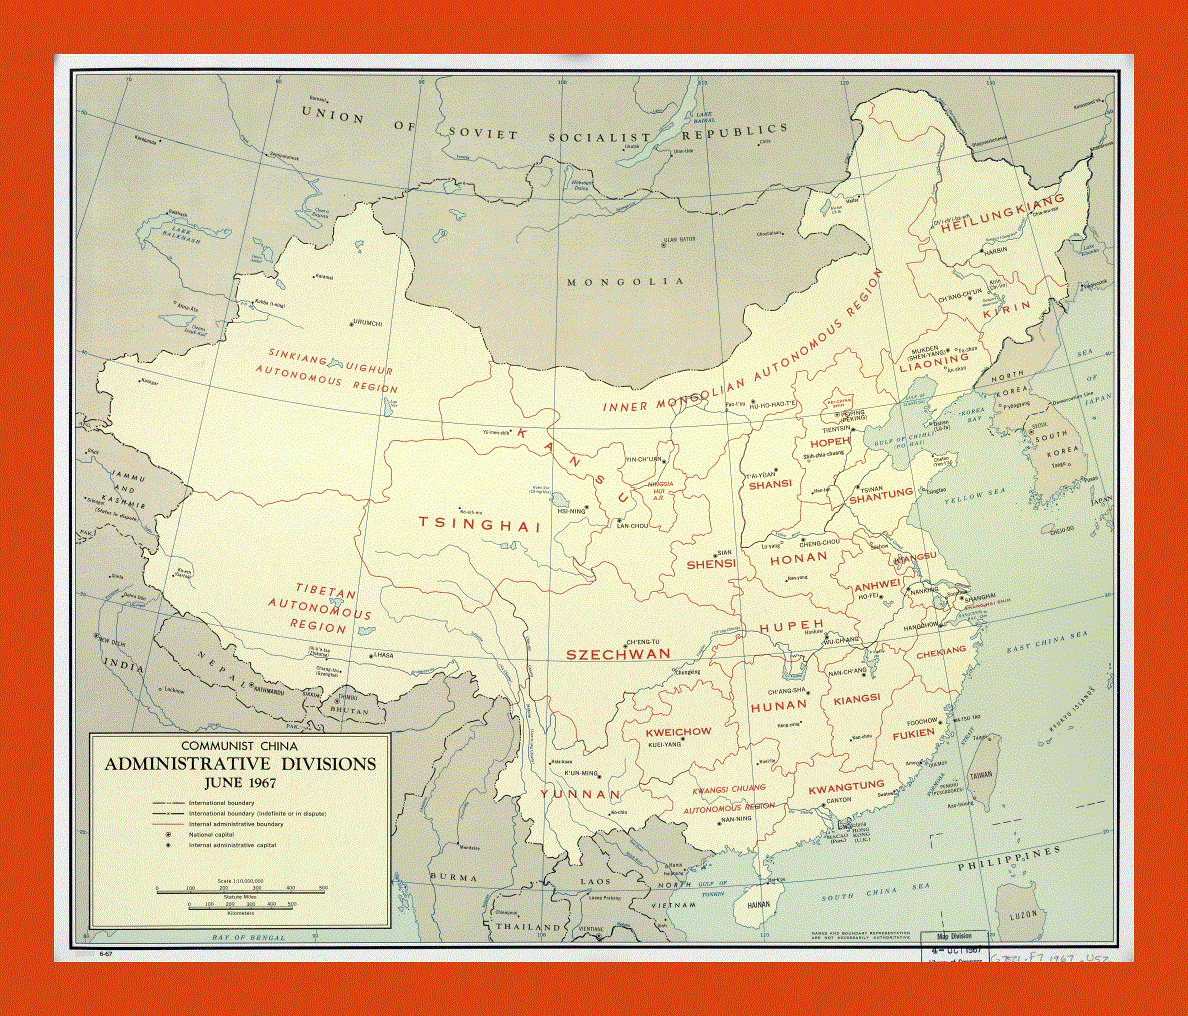 Communist China administrative divisions map - 1967